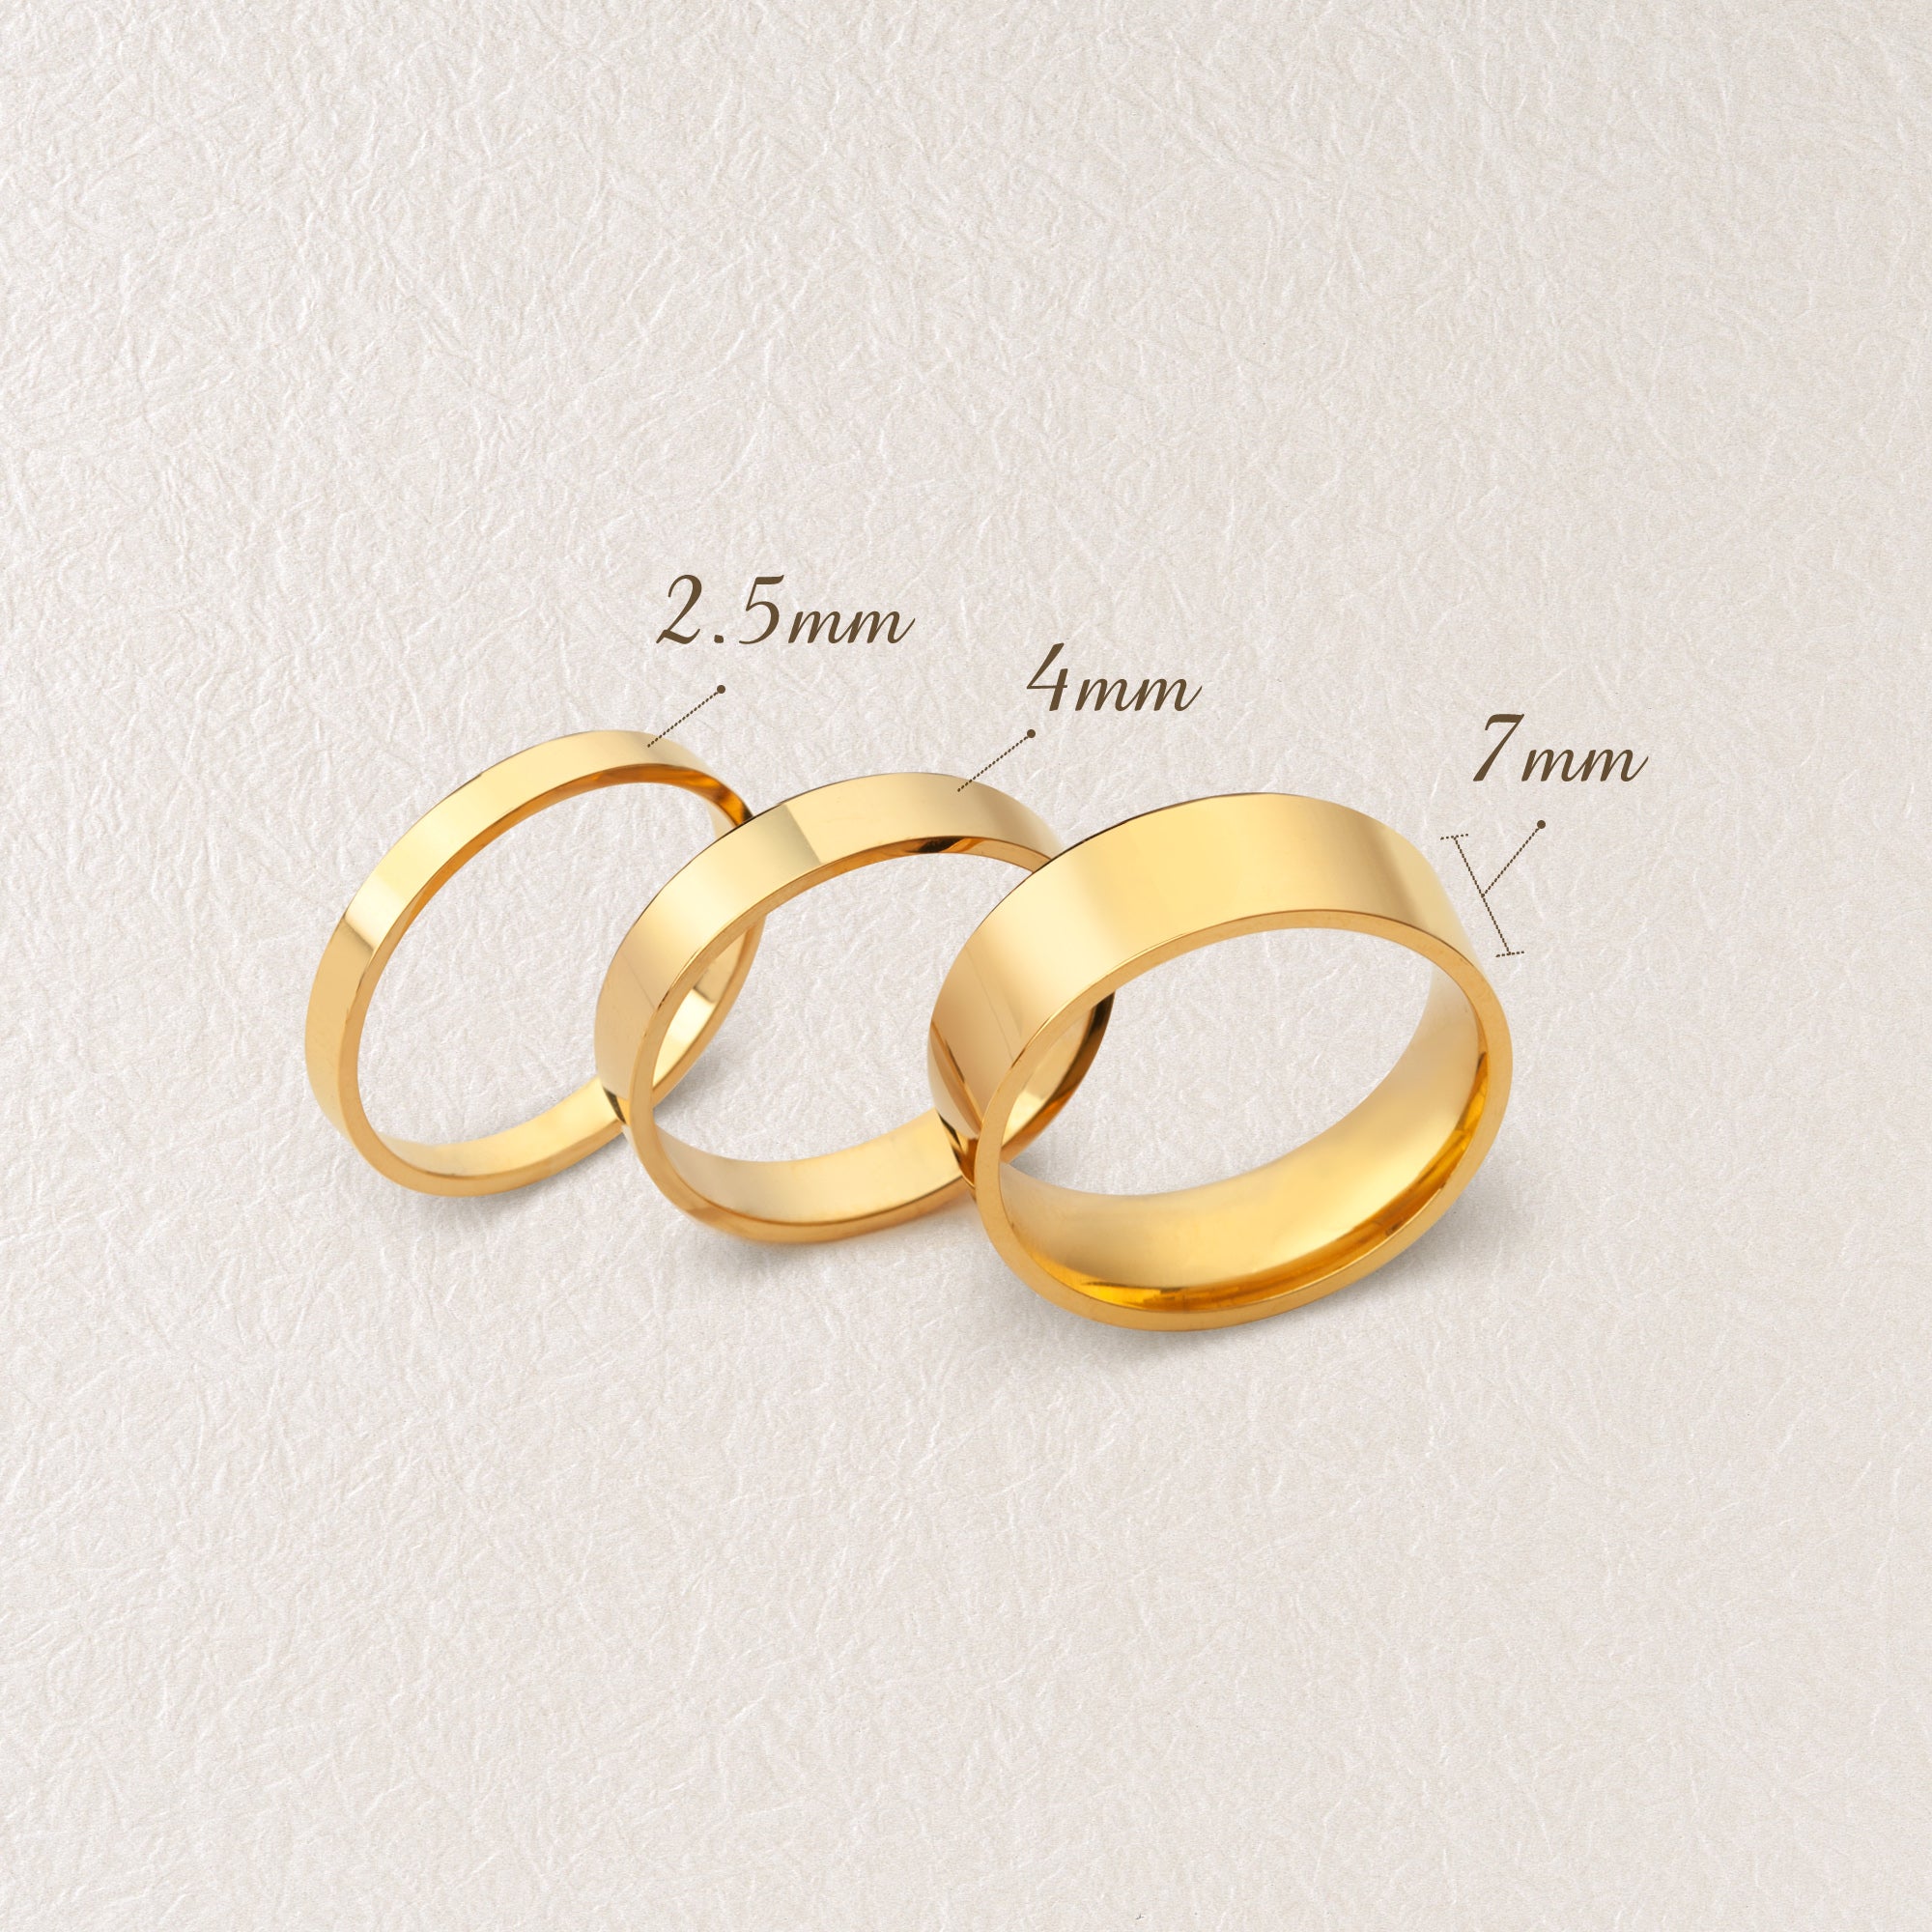 Nidin Simple Heart Ring 5 Colors For Women Female Cute Finger Open Rings  Romantic Birthday Gift For Girlfriend Fashion Jewelry